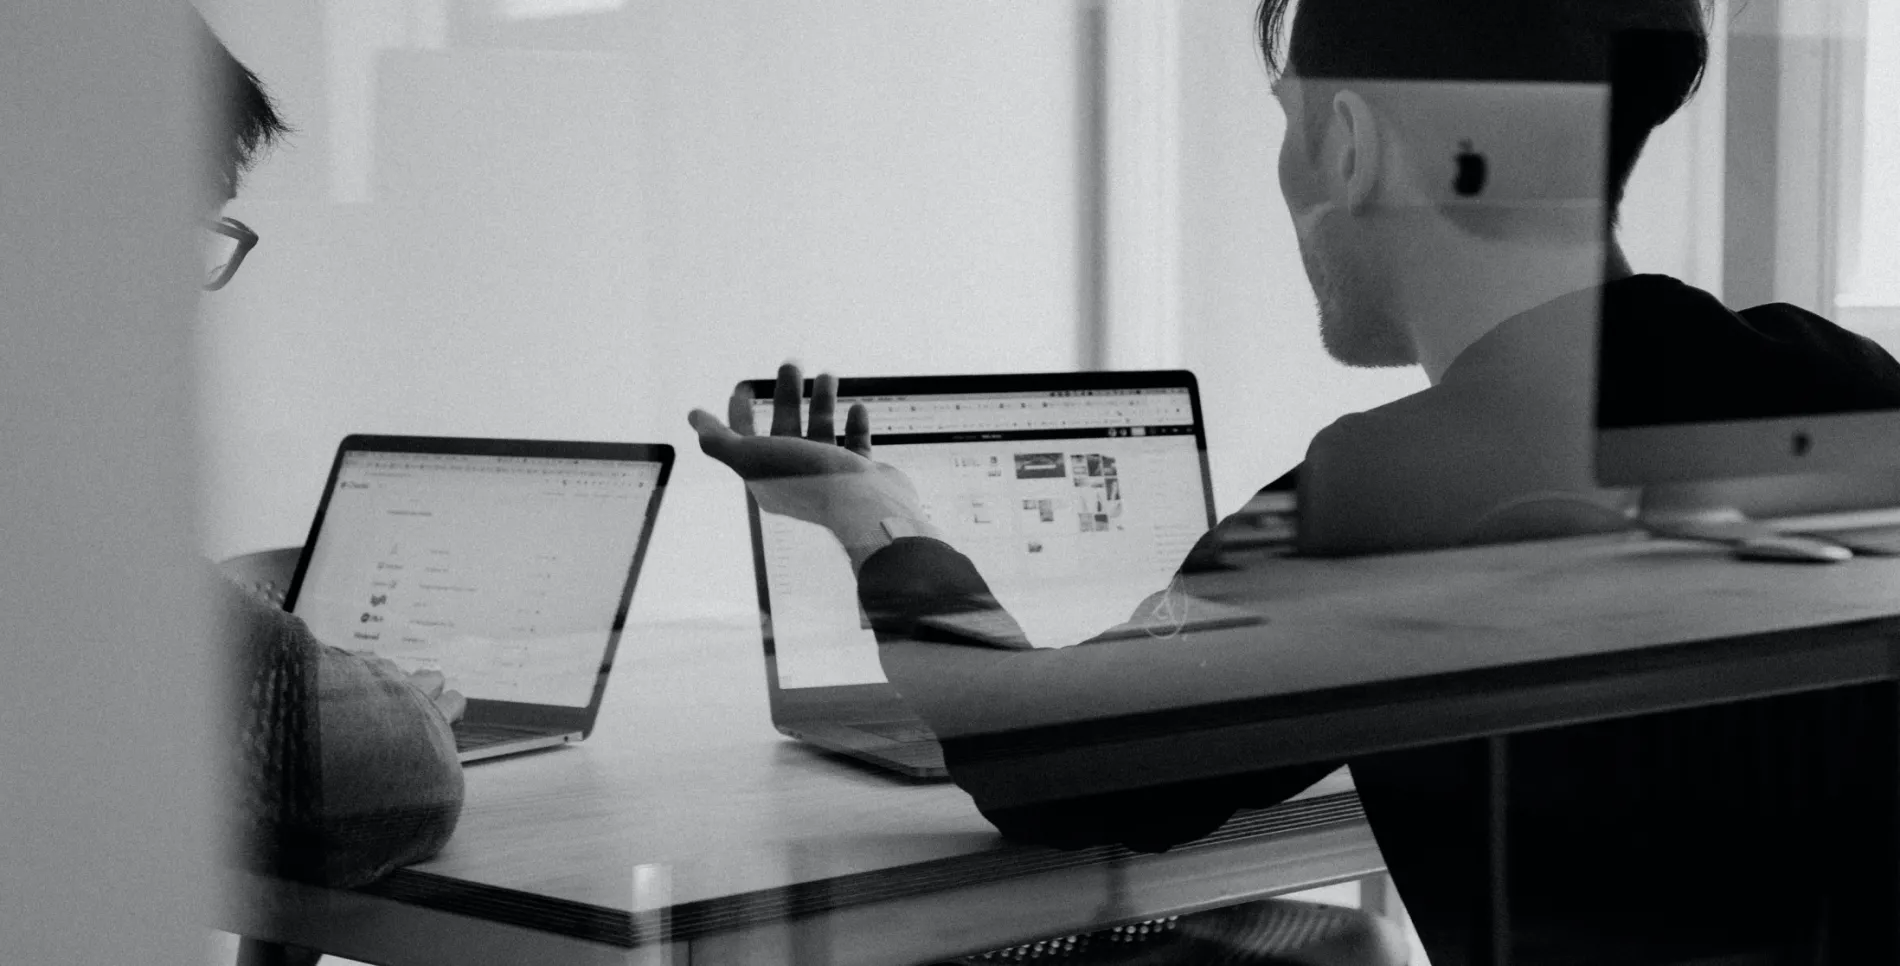 Black and white photo of two people sitting at their laptops